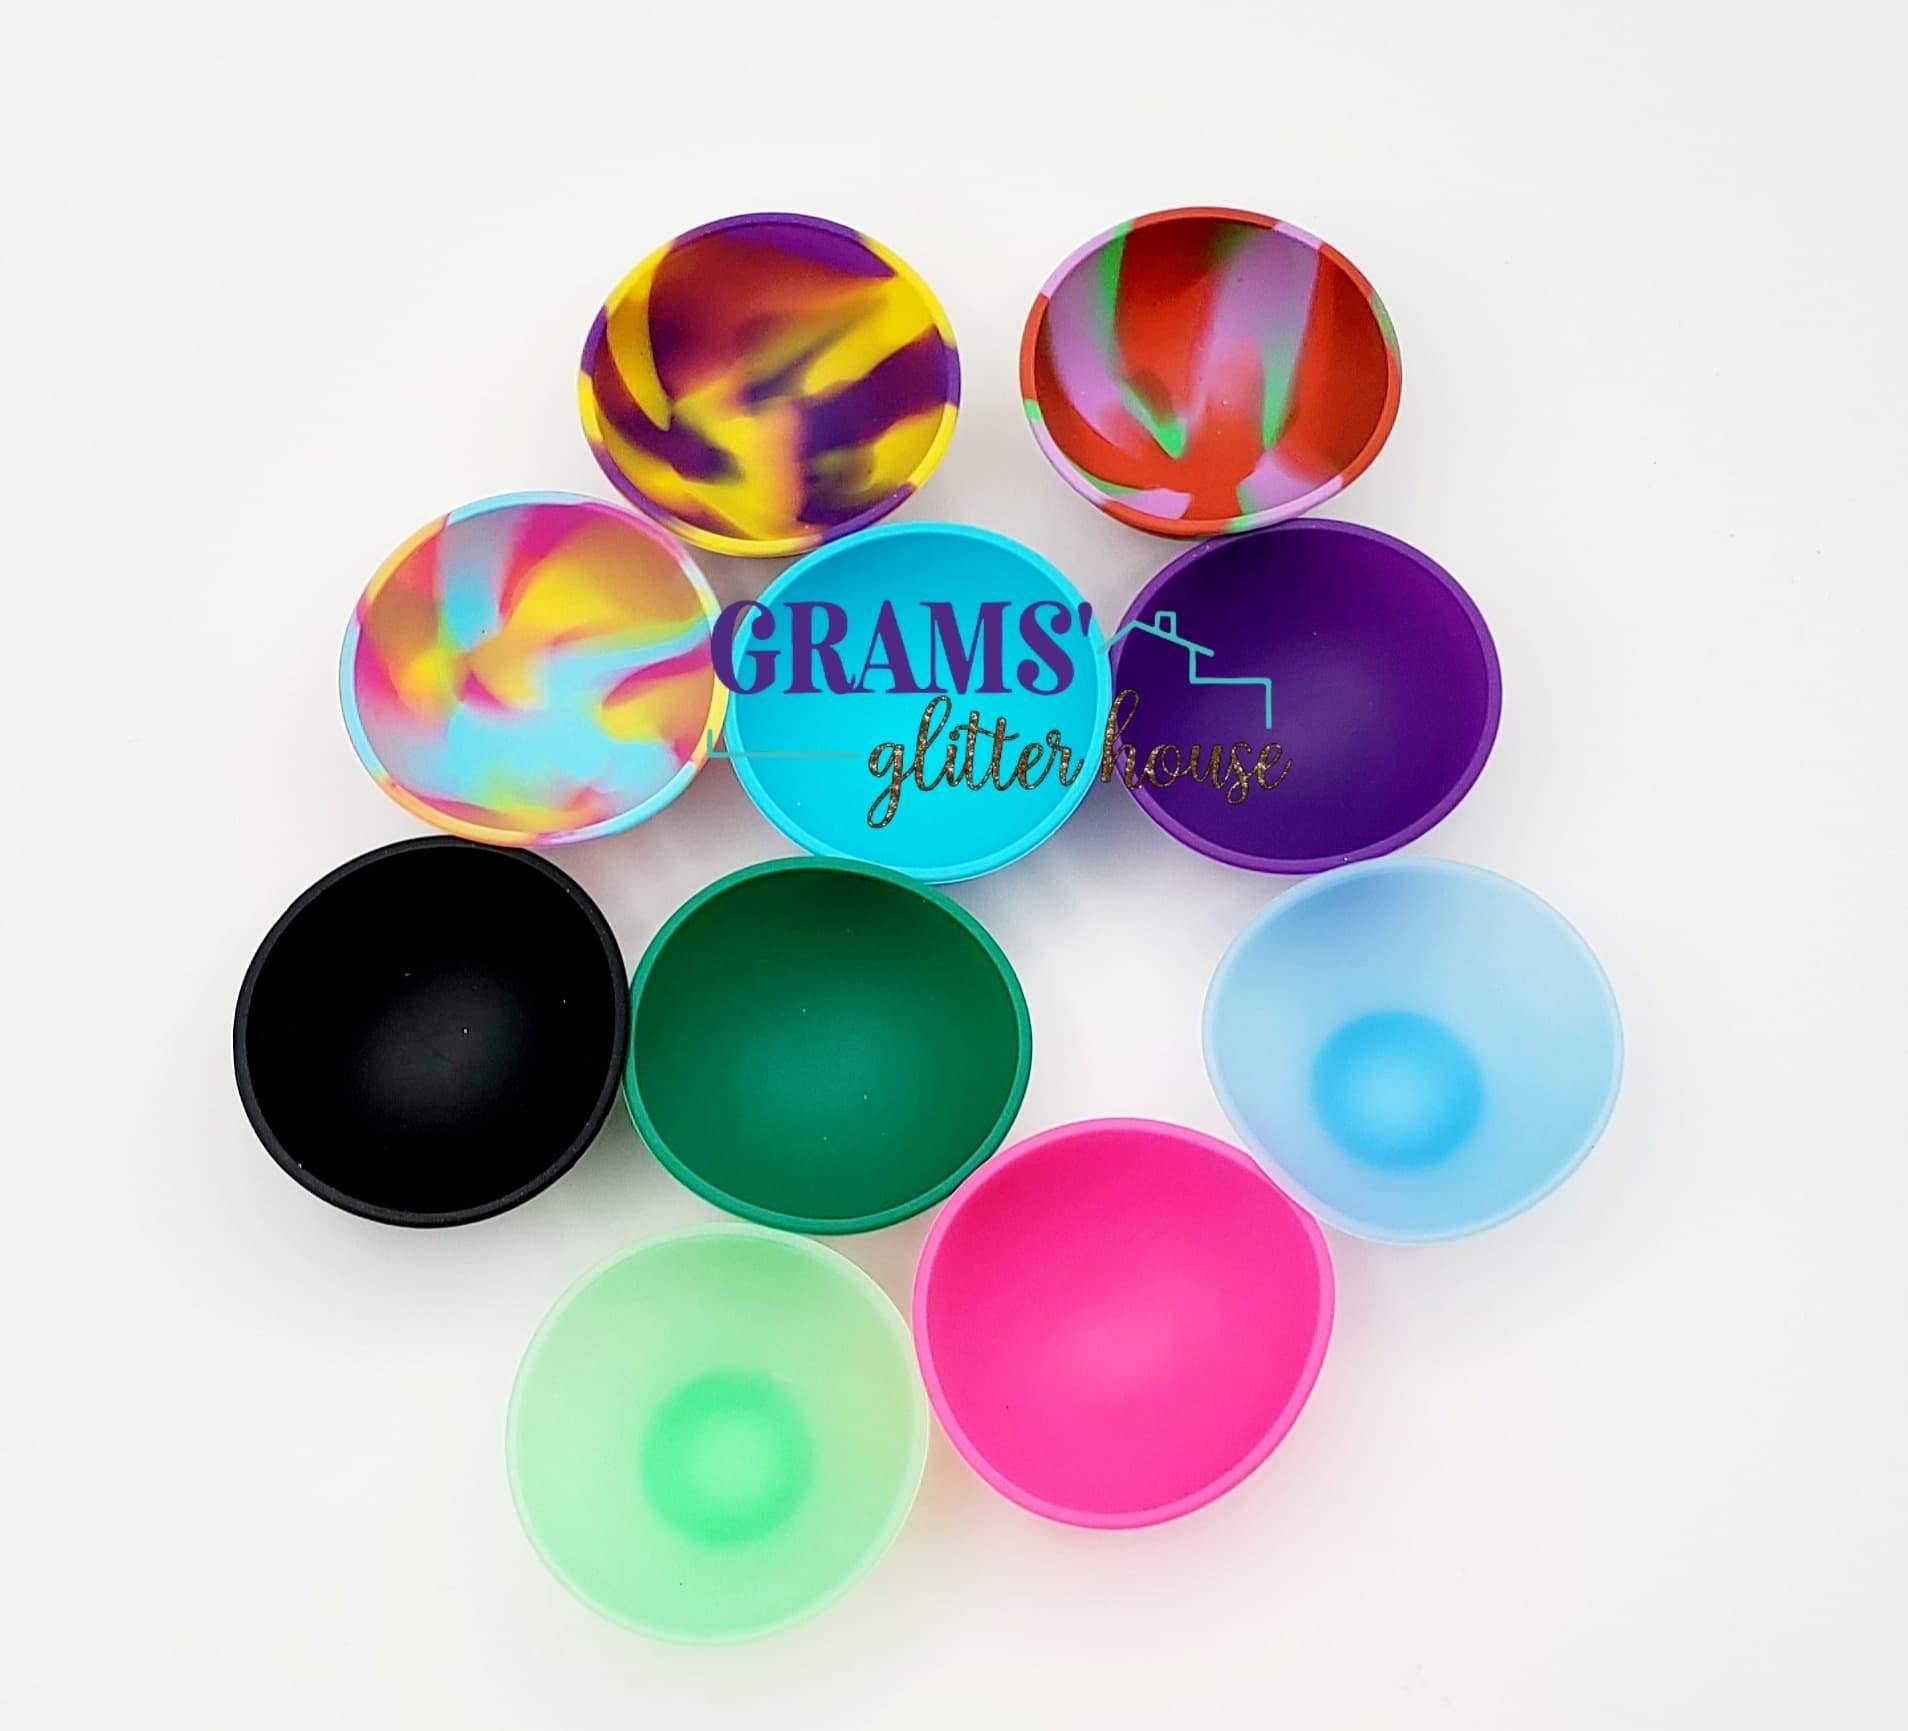 Set of 10 Grams' Glitter House Silicone Bowl Set Supplies